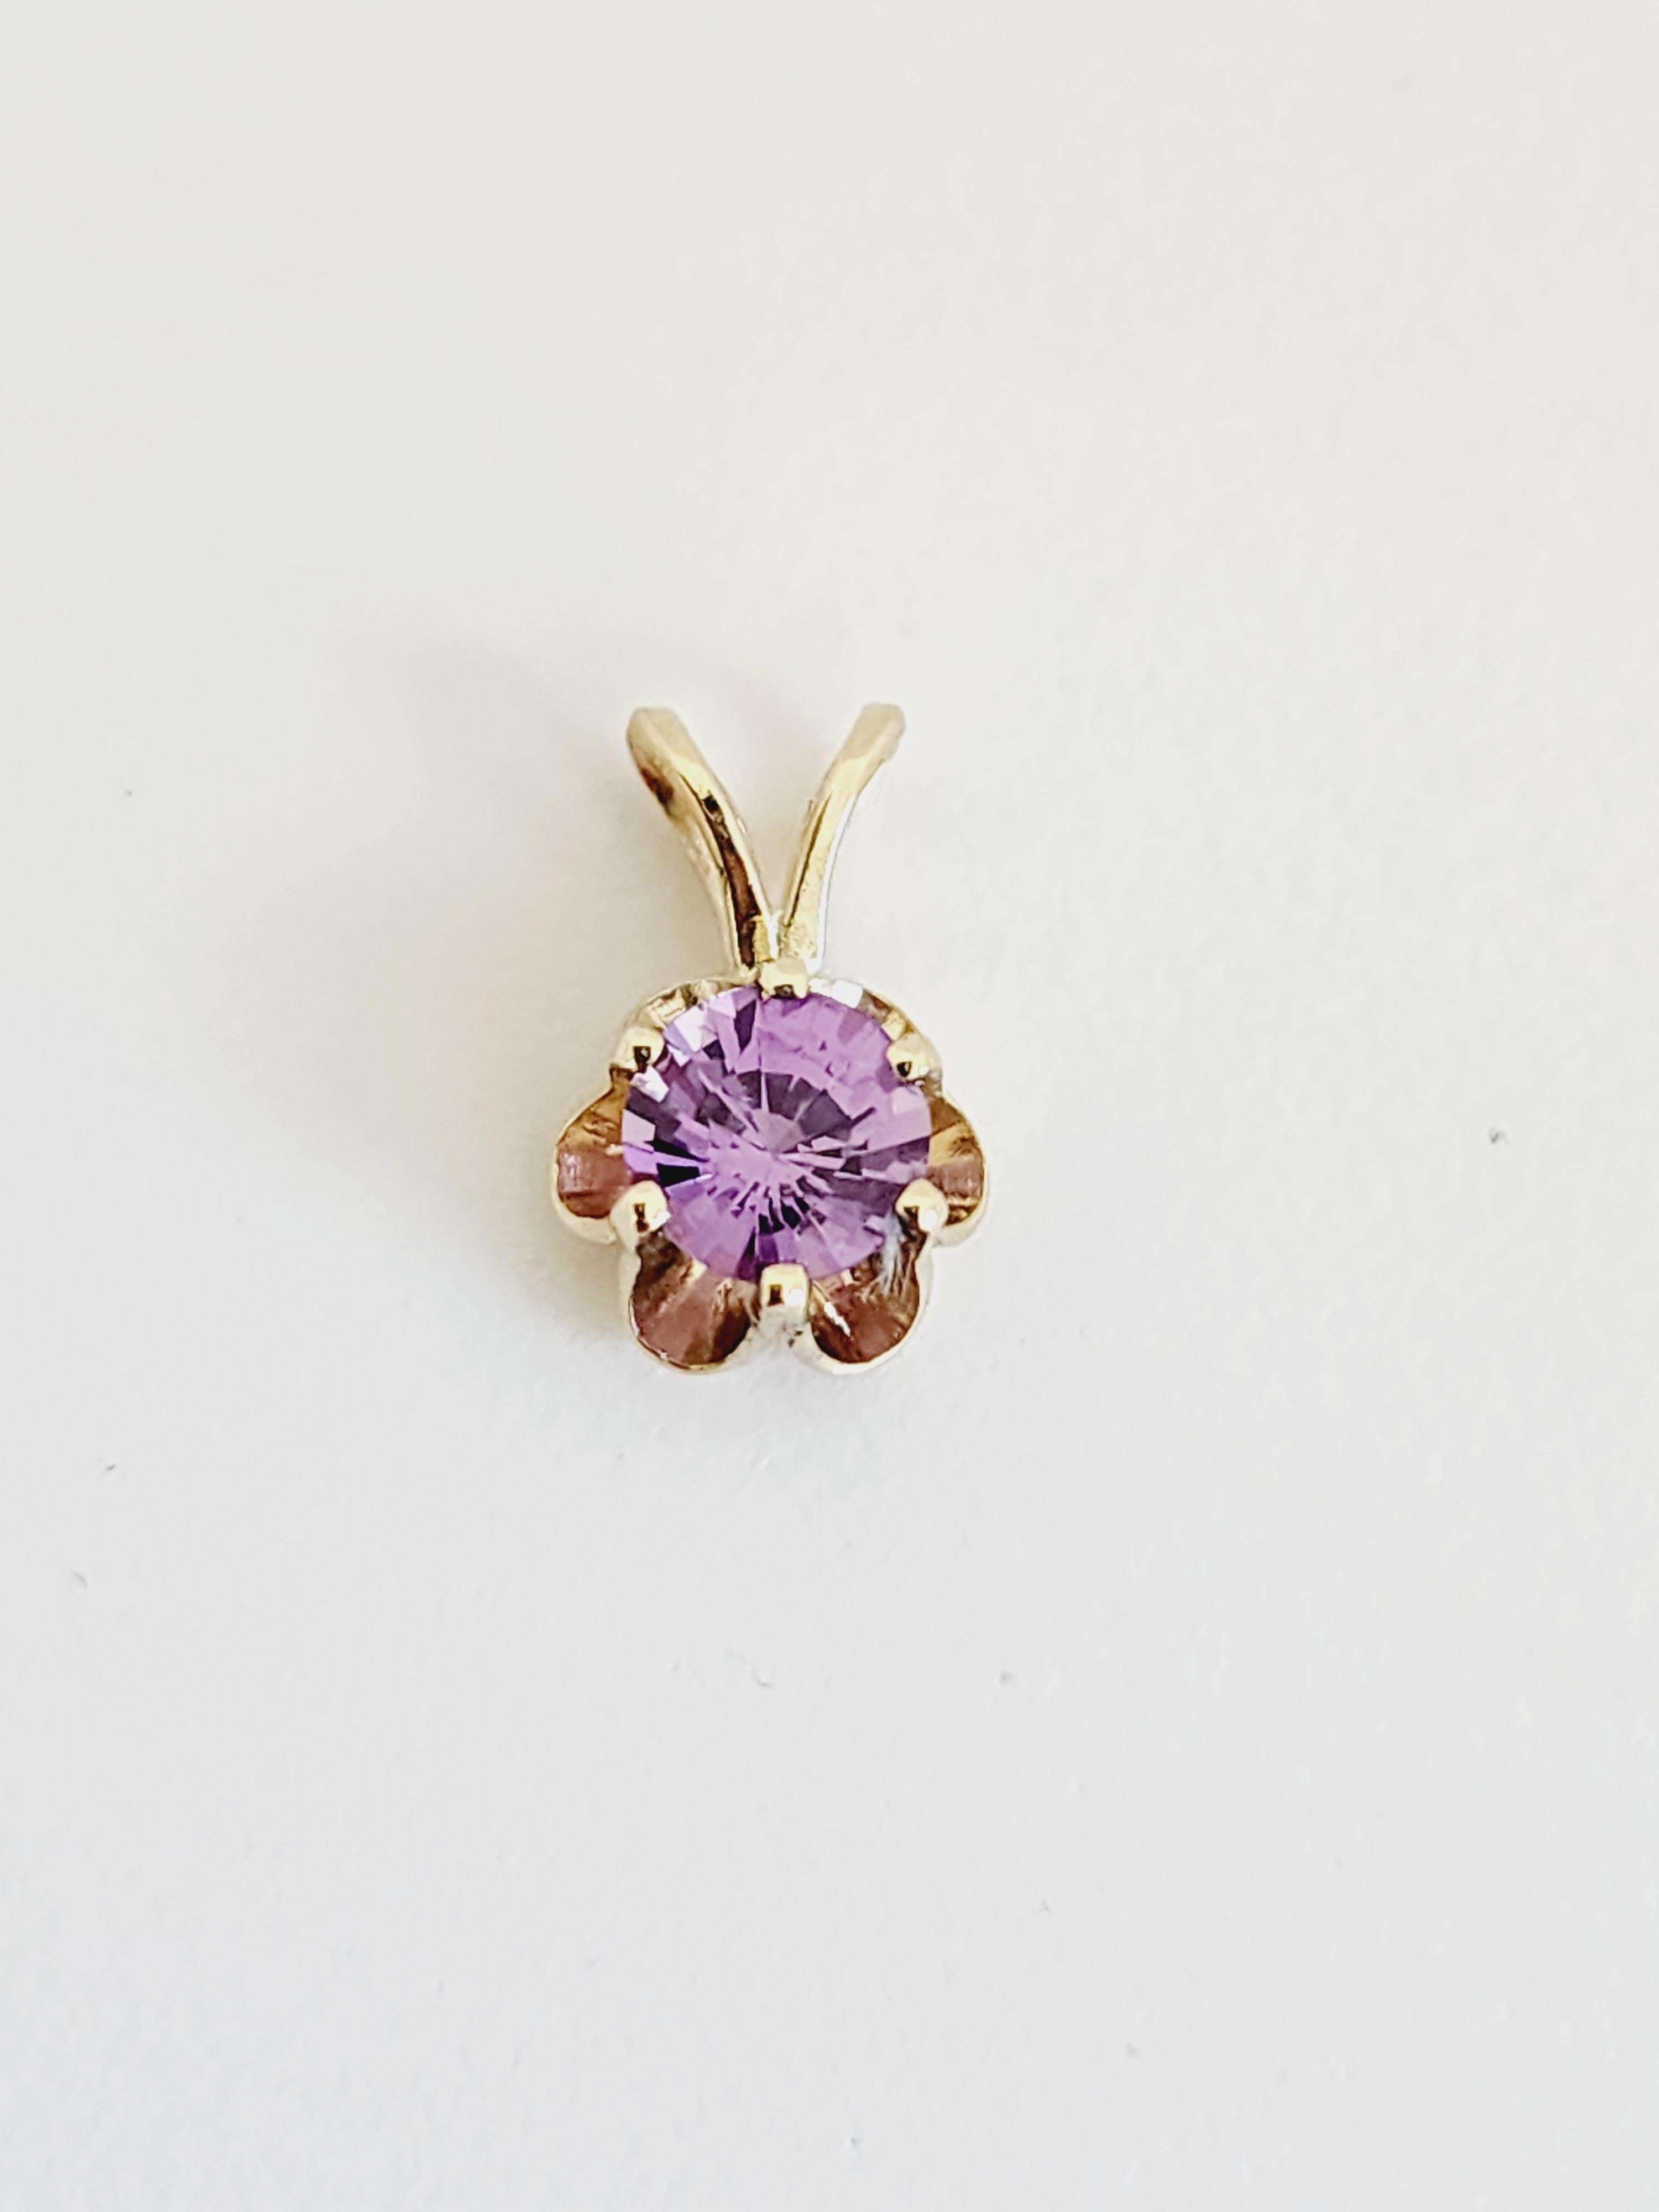 0.56 Carat Purple Sapphire Pendant 14 Karat Yellow Gold. Pendant measures approximately 0.45 inch length and 0.30 inch wide. 

(Pendant Only-Chain sold separately)

*Free shipping within the U.S.*